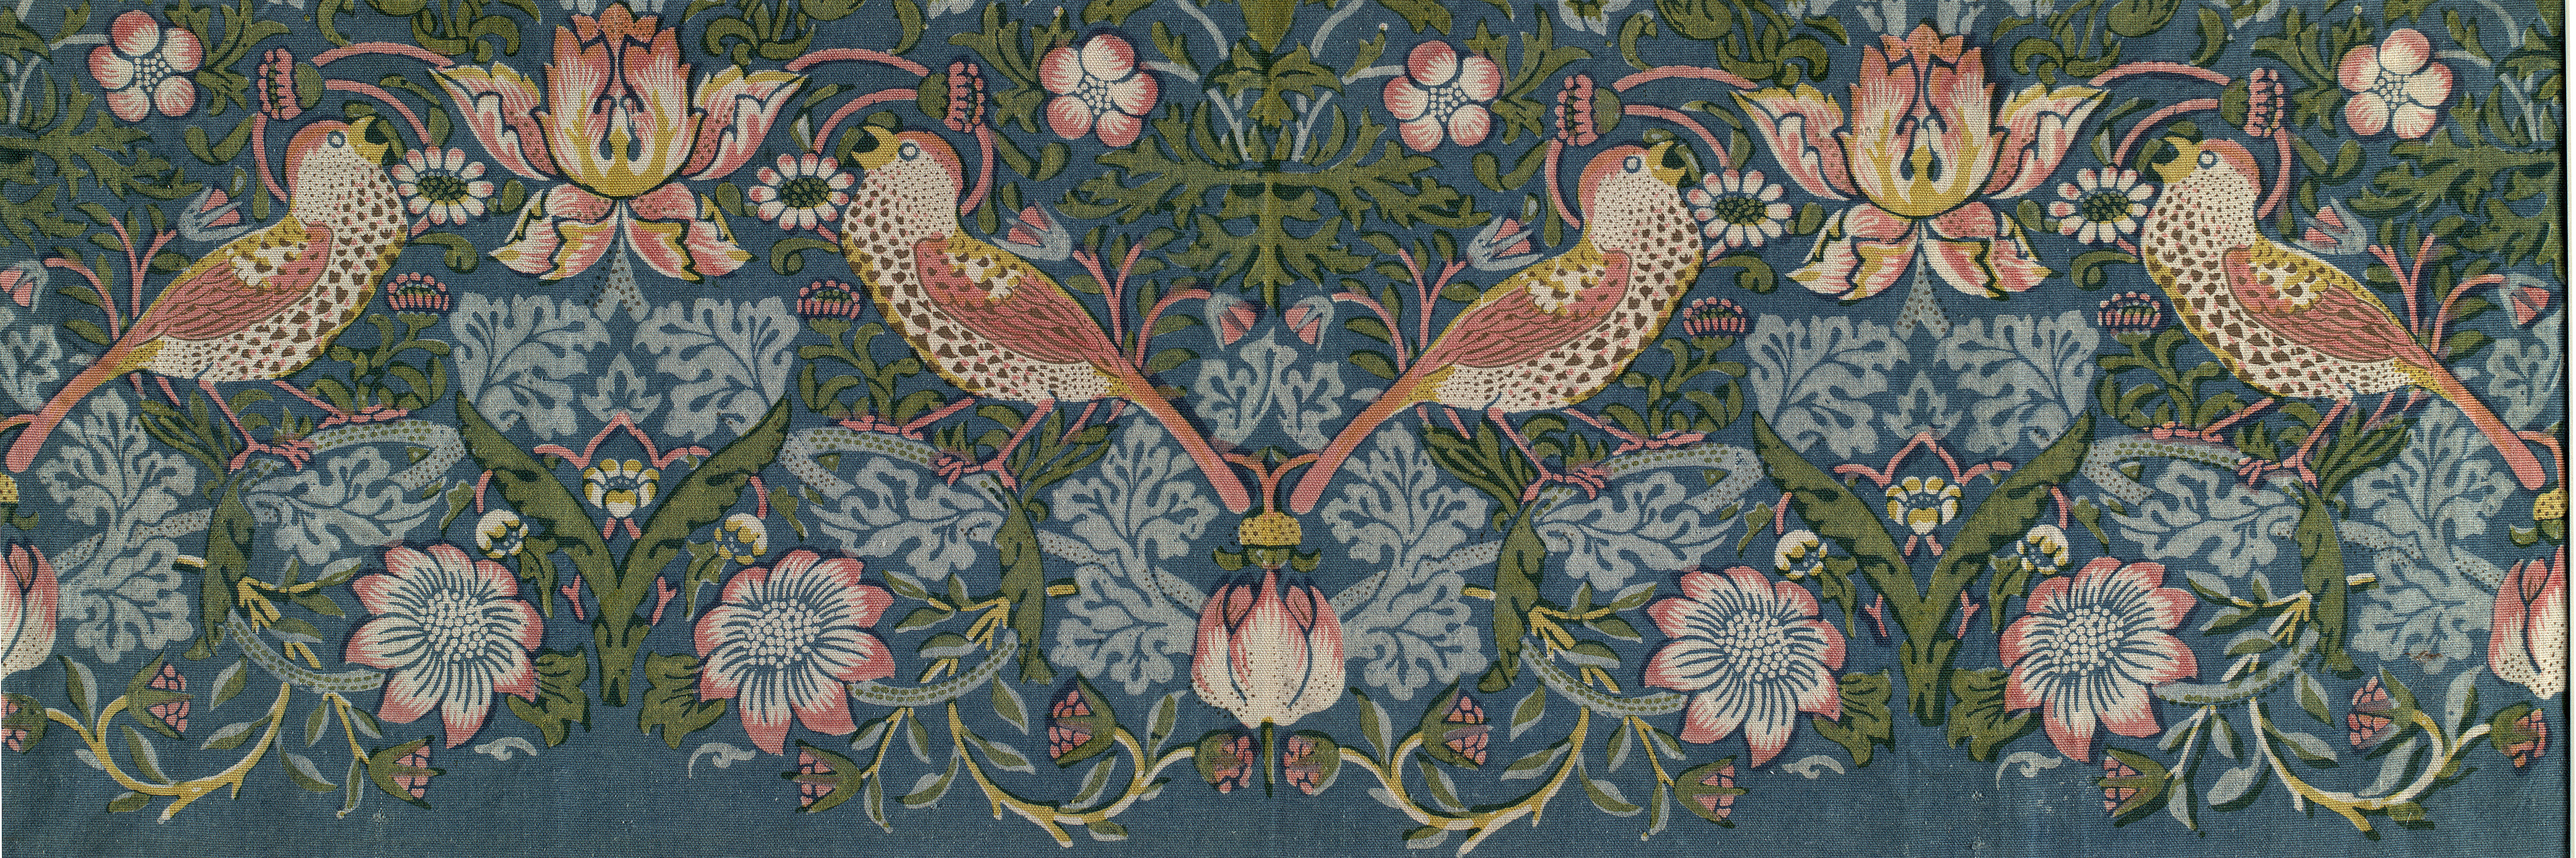 Symmetrical artwork shows stylized plant parts in reds, blues, and greens. Each half of the artwork includes two stylized birds facing blooming flower.